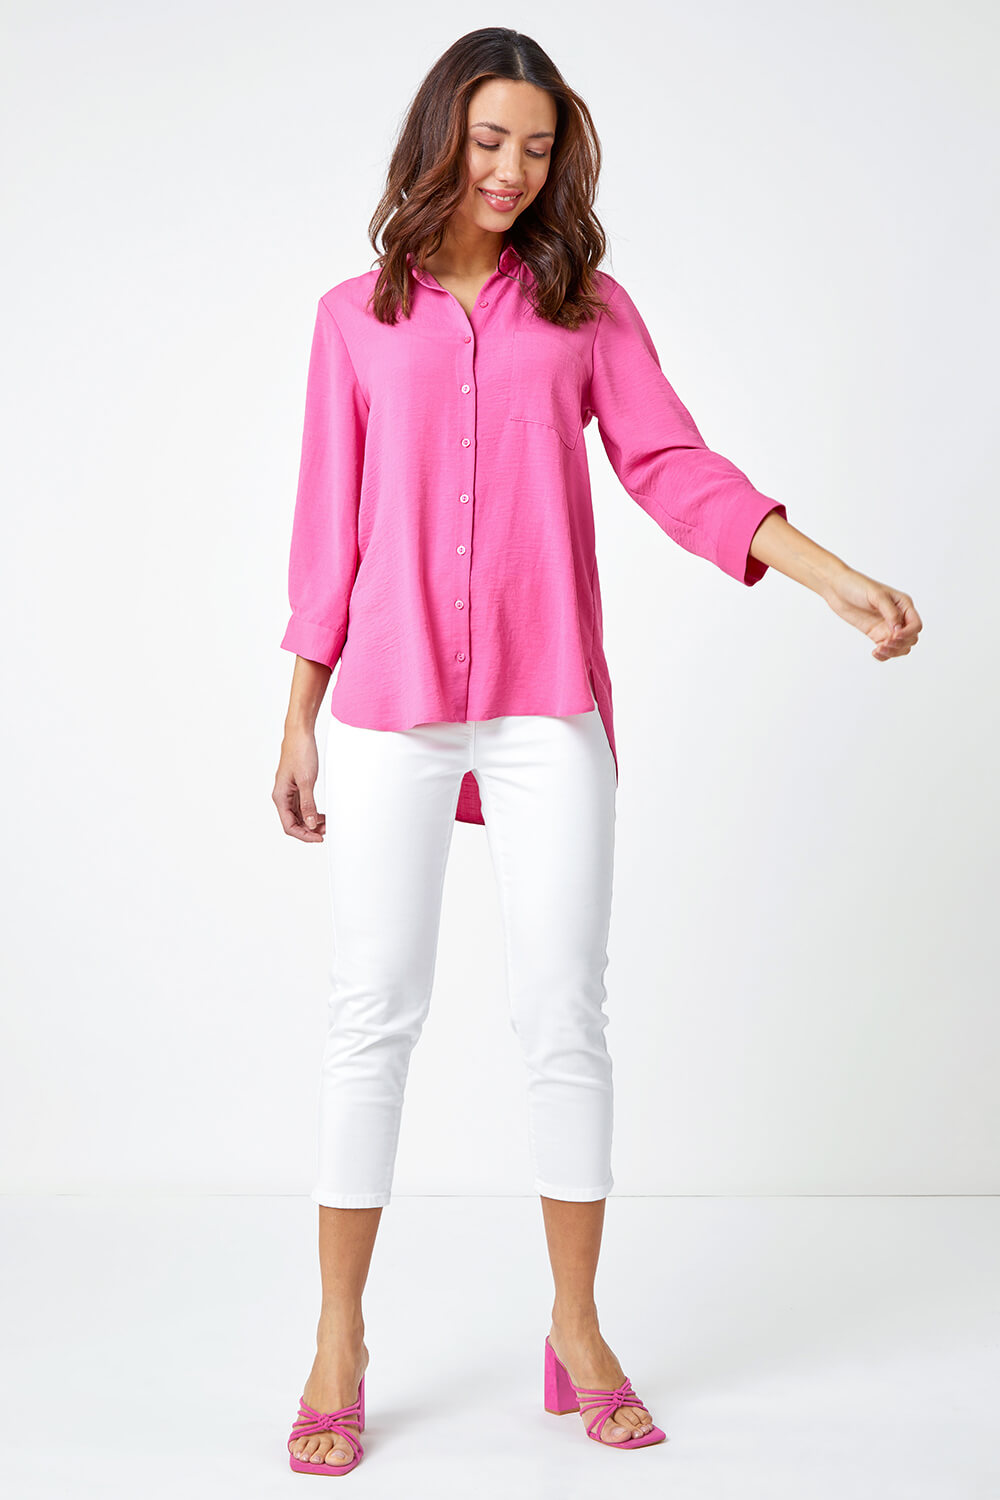 PINK Relaxed Longline Shirt, Image 2 of 5